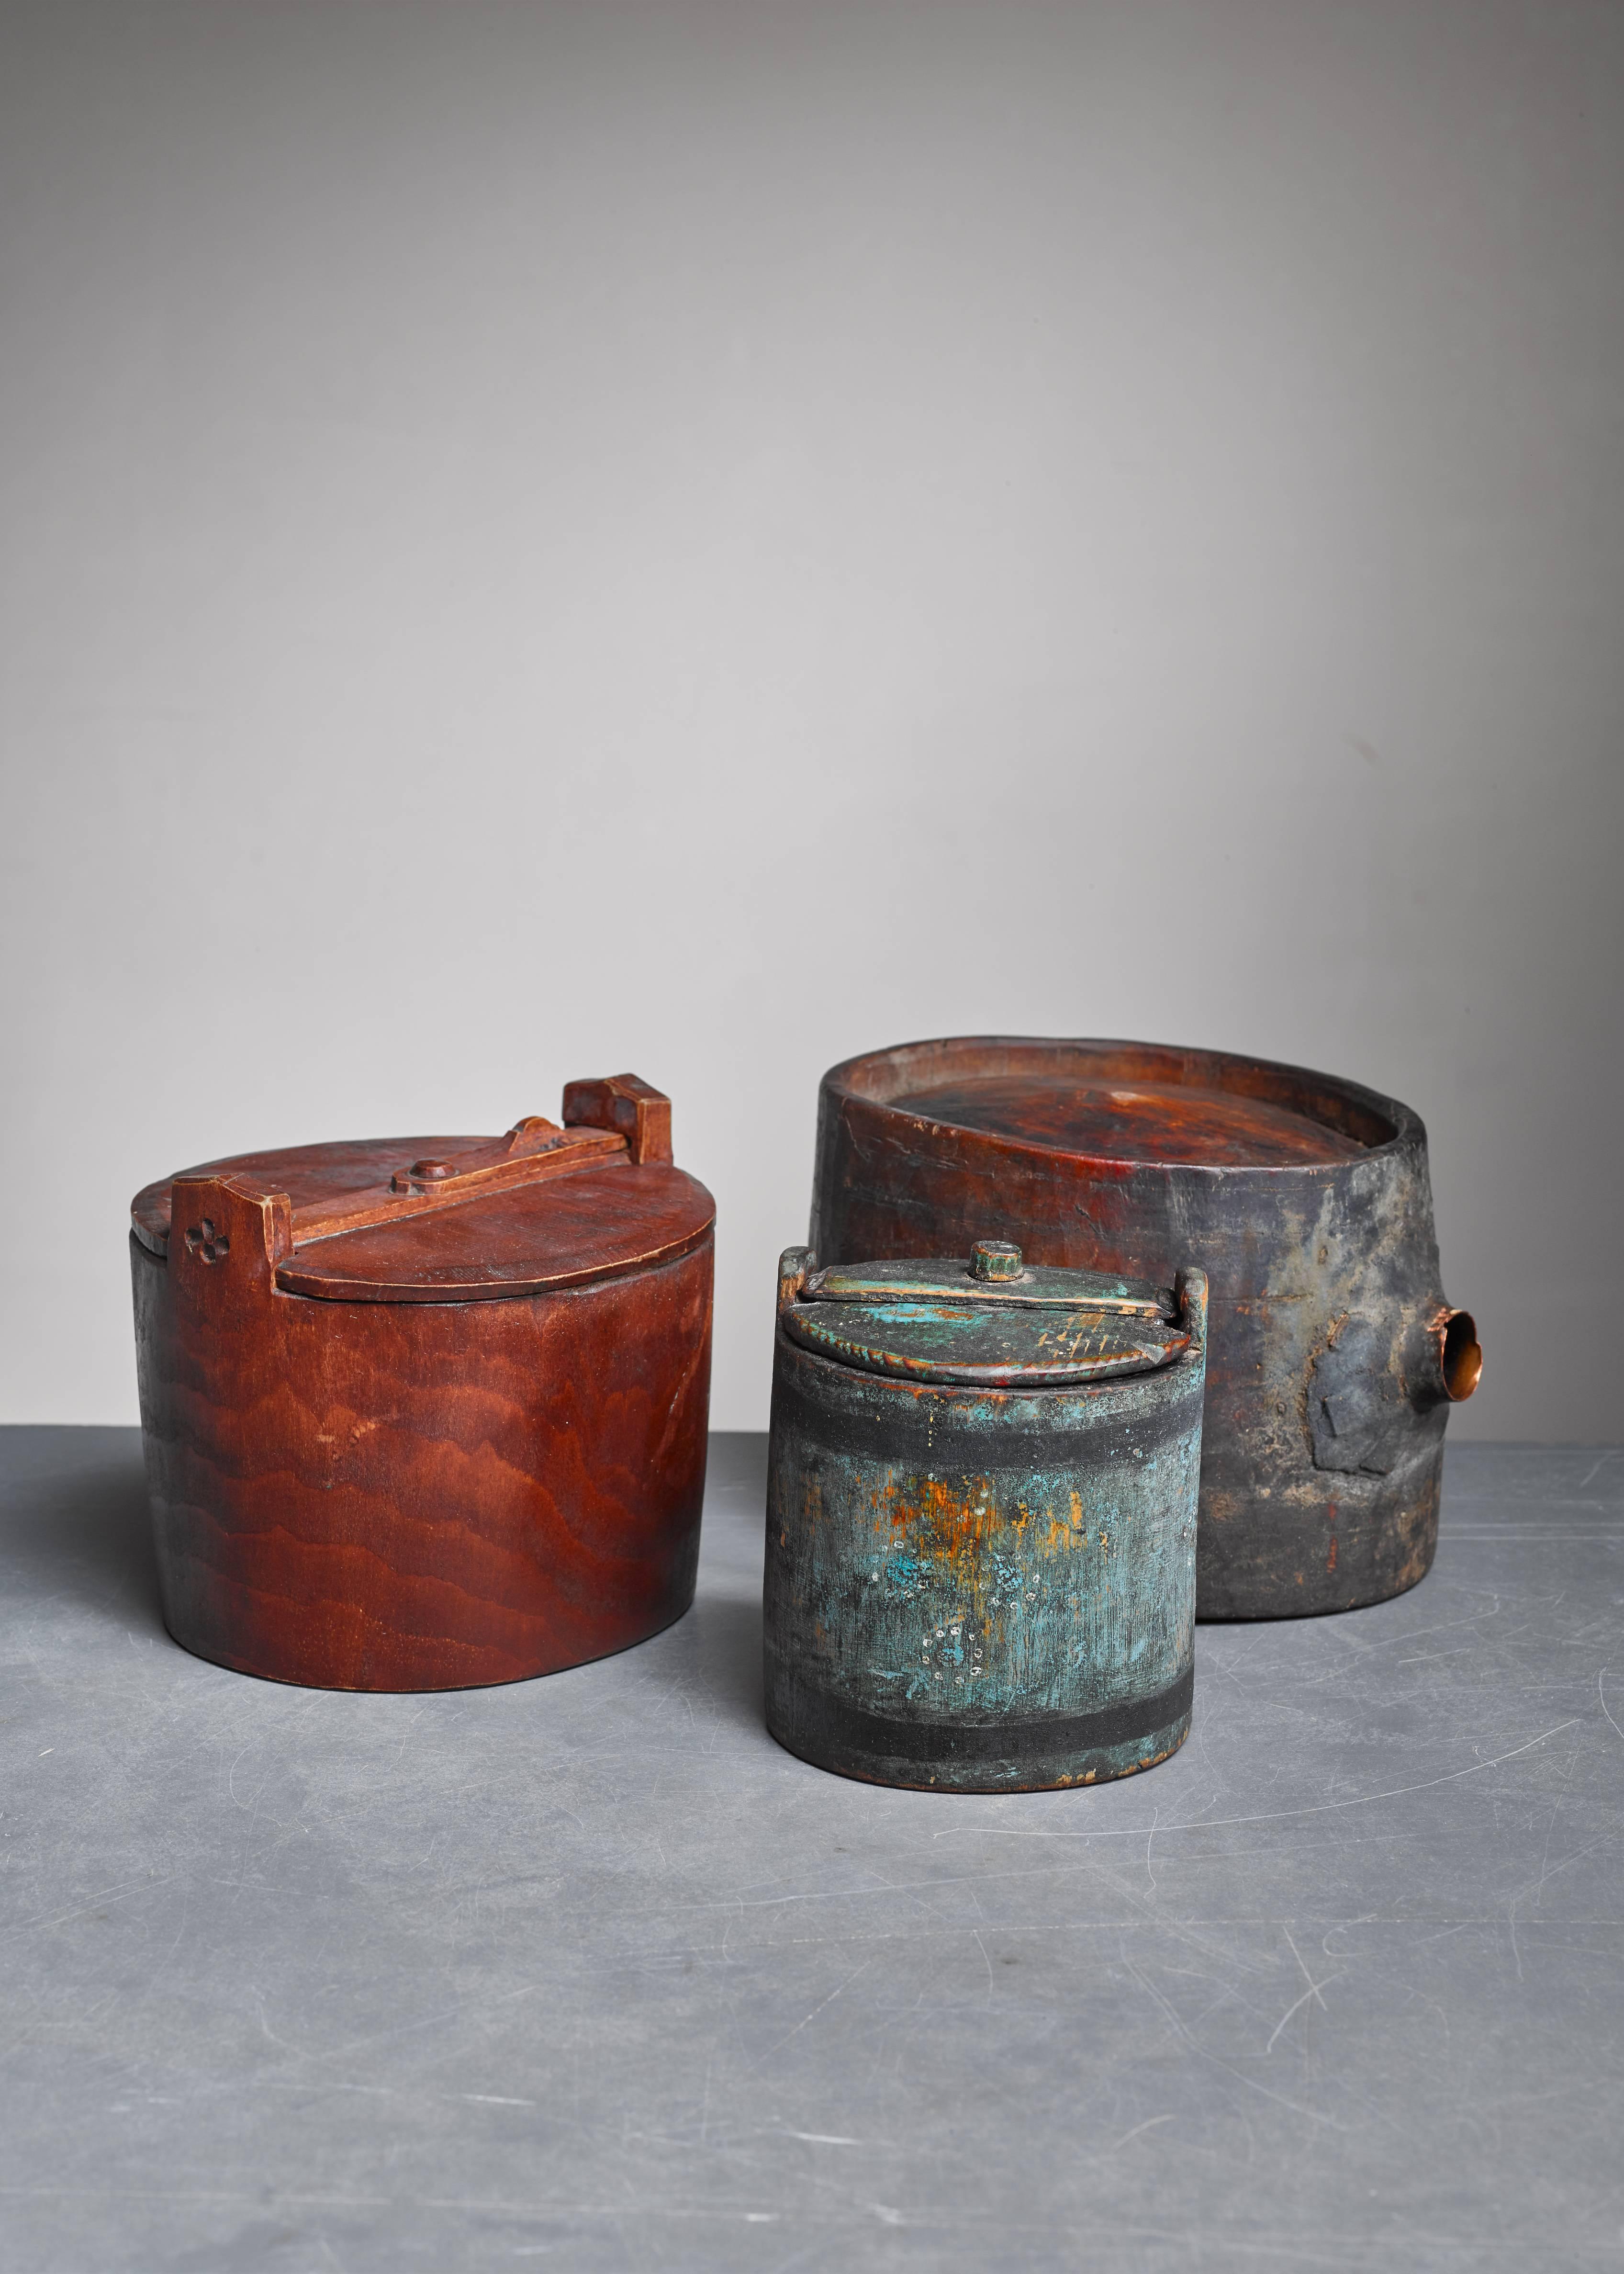 A set of two 19th century wooden folk art pieces from Sweden: two round, lockable boxes and one barrel with a copper opening.

Barrel dimensions:
W 17cm / 6.7